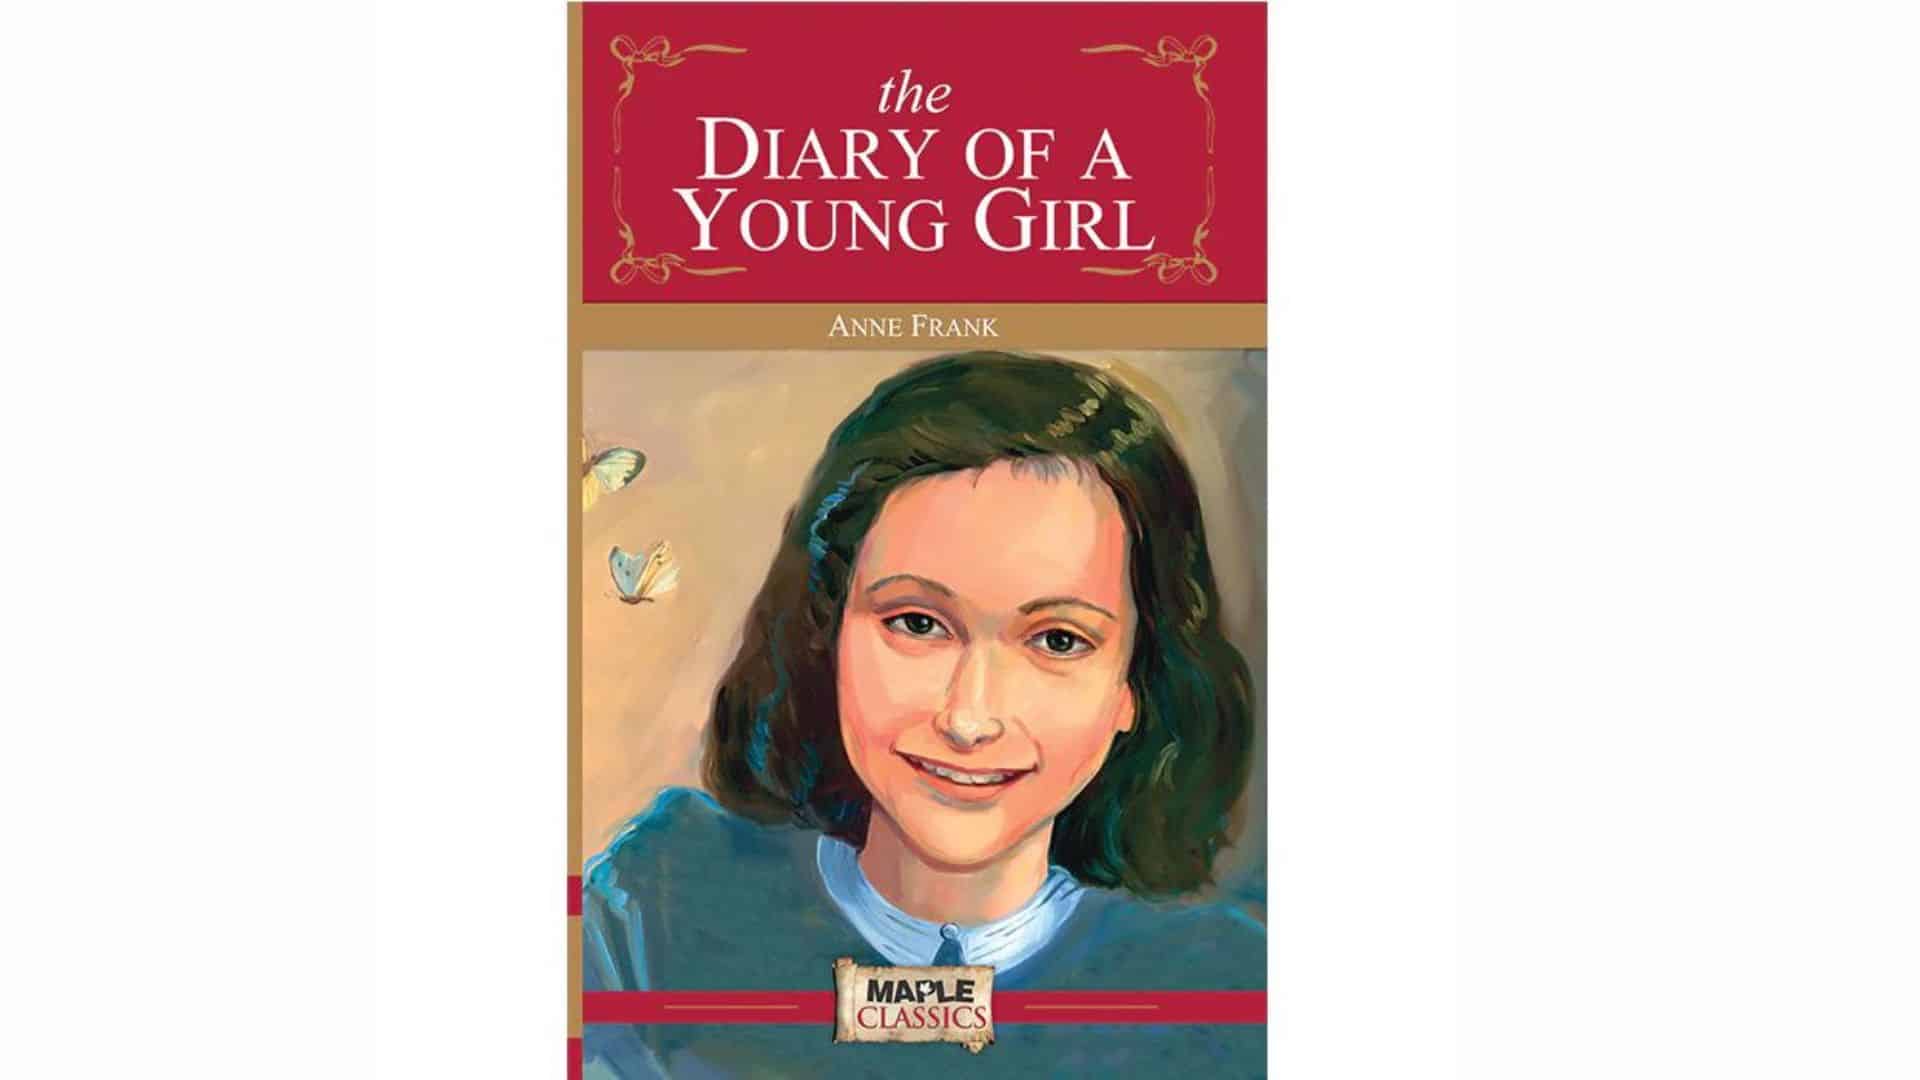 The Diary of a Young Girl
